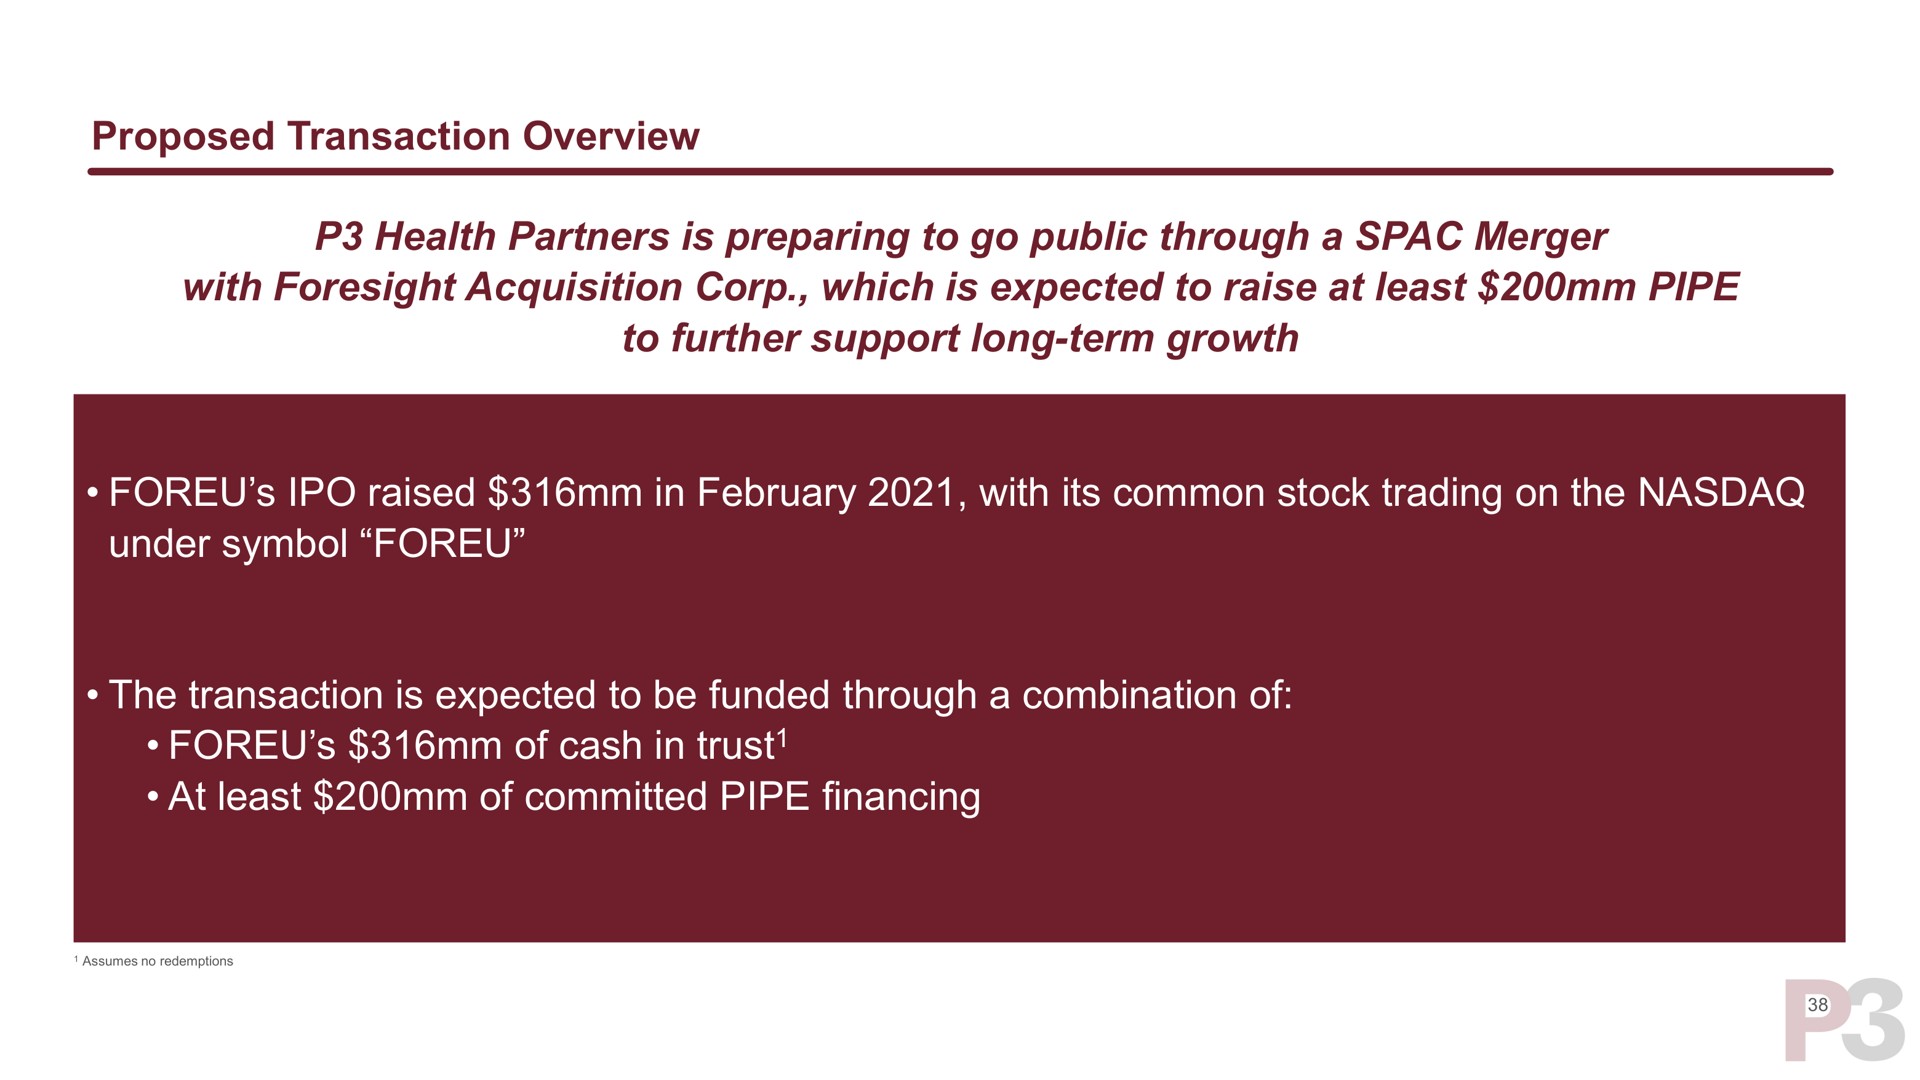 proposed transaction overview health partners is preparing to go public through a merger with foresight acquisition corp which is expected to raise at least pipe to further support long term growth raised in with its common stock trading on the under symbol the transaction is expected to be funded through a combination of of cash in trust at least of committed pipe financing trust | P3 Health Partners